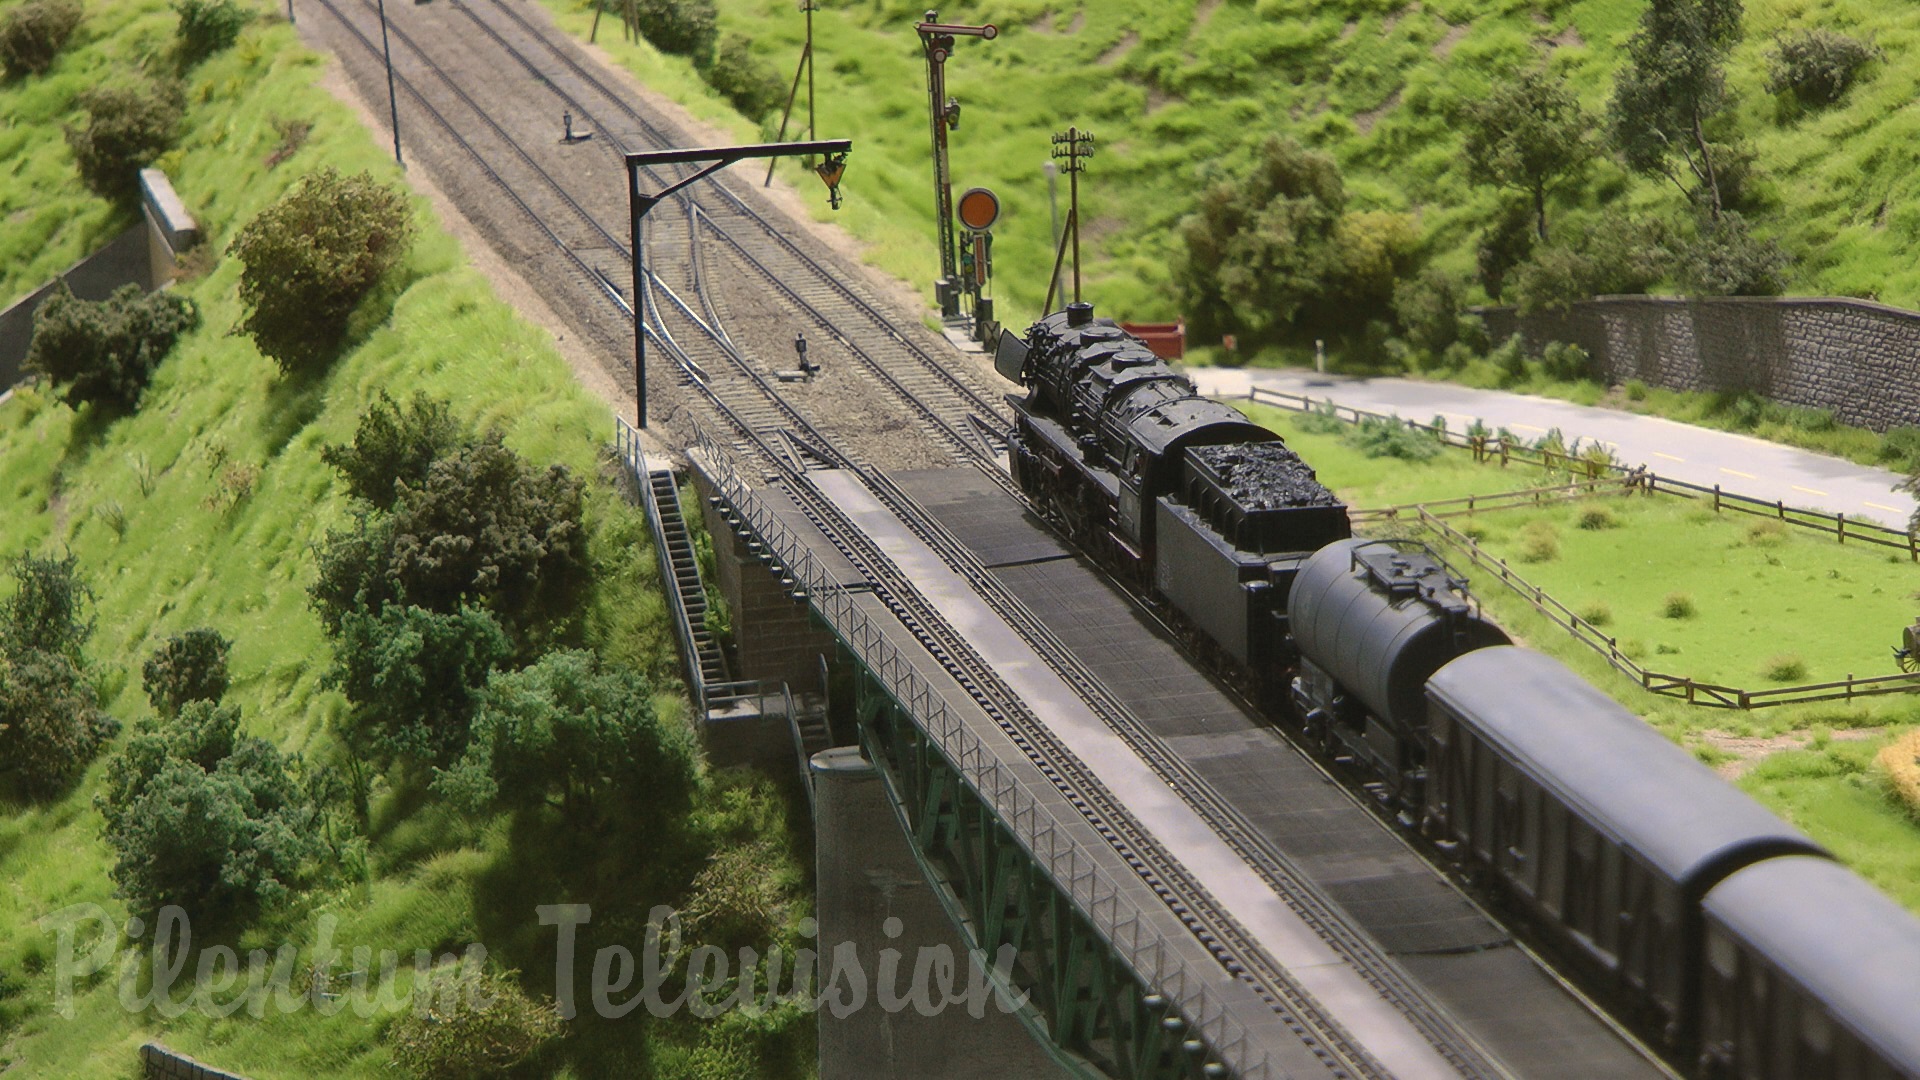 Steam Locomotive and Trains on a Model Railway Layout in HO Scale